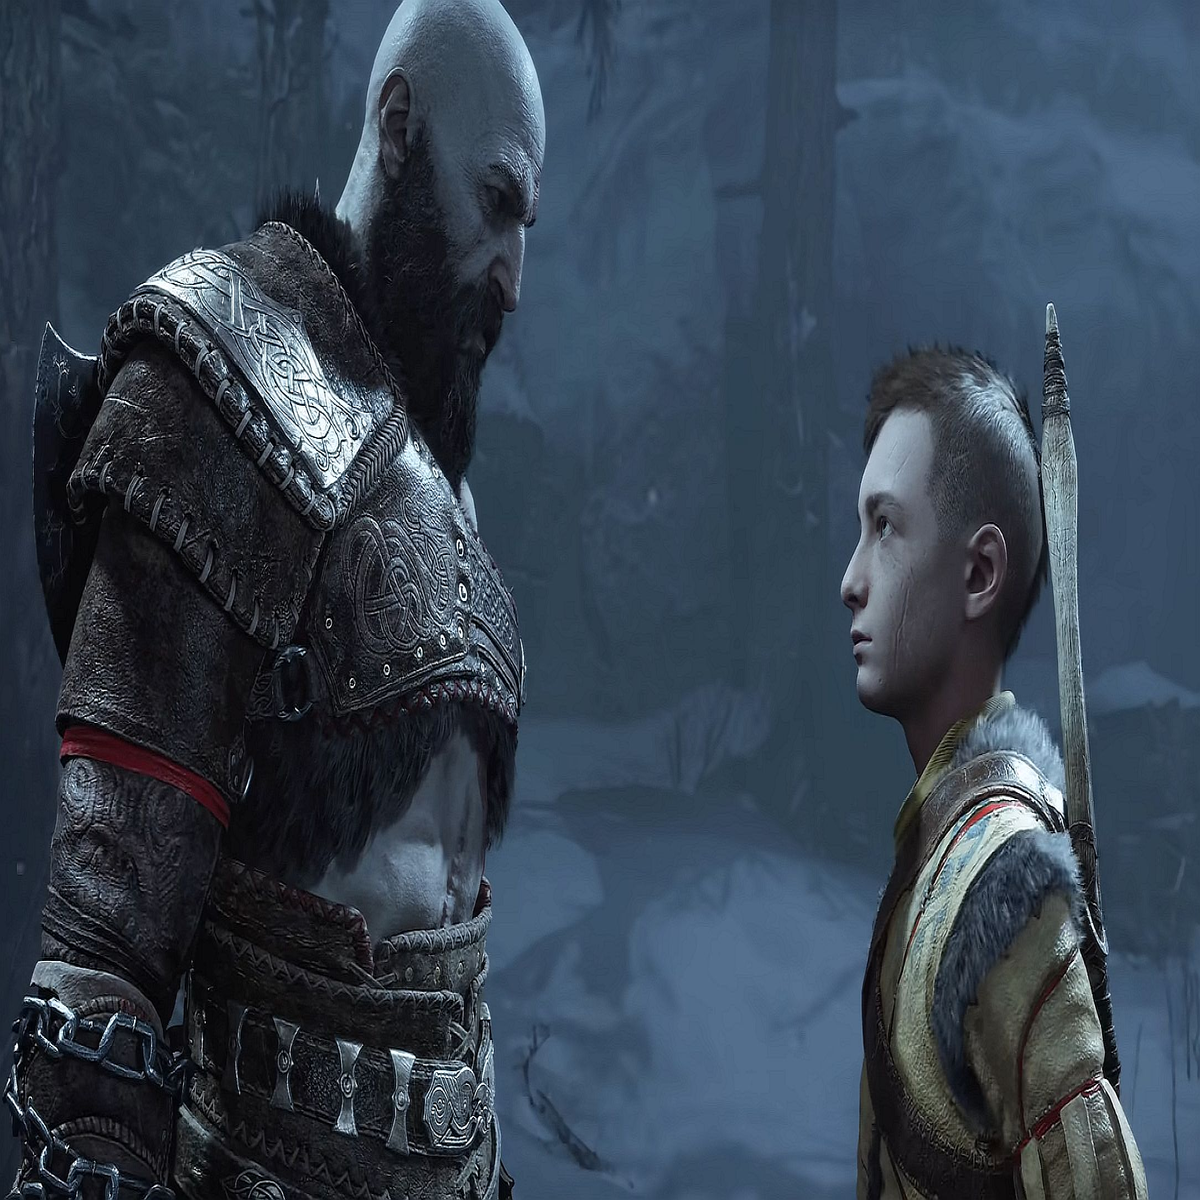 God of War Ragnarok is already the biggest launch in the